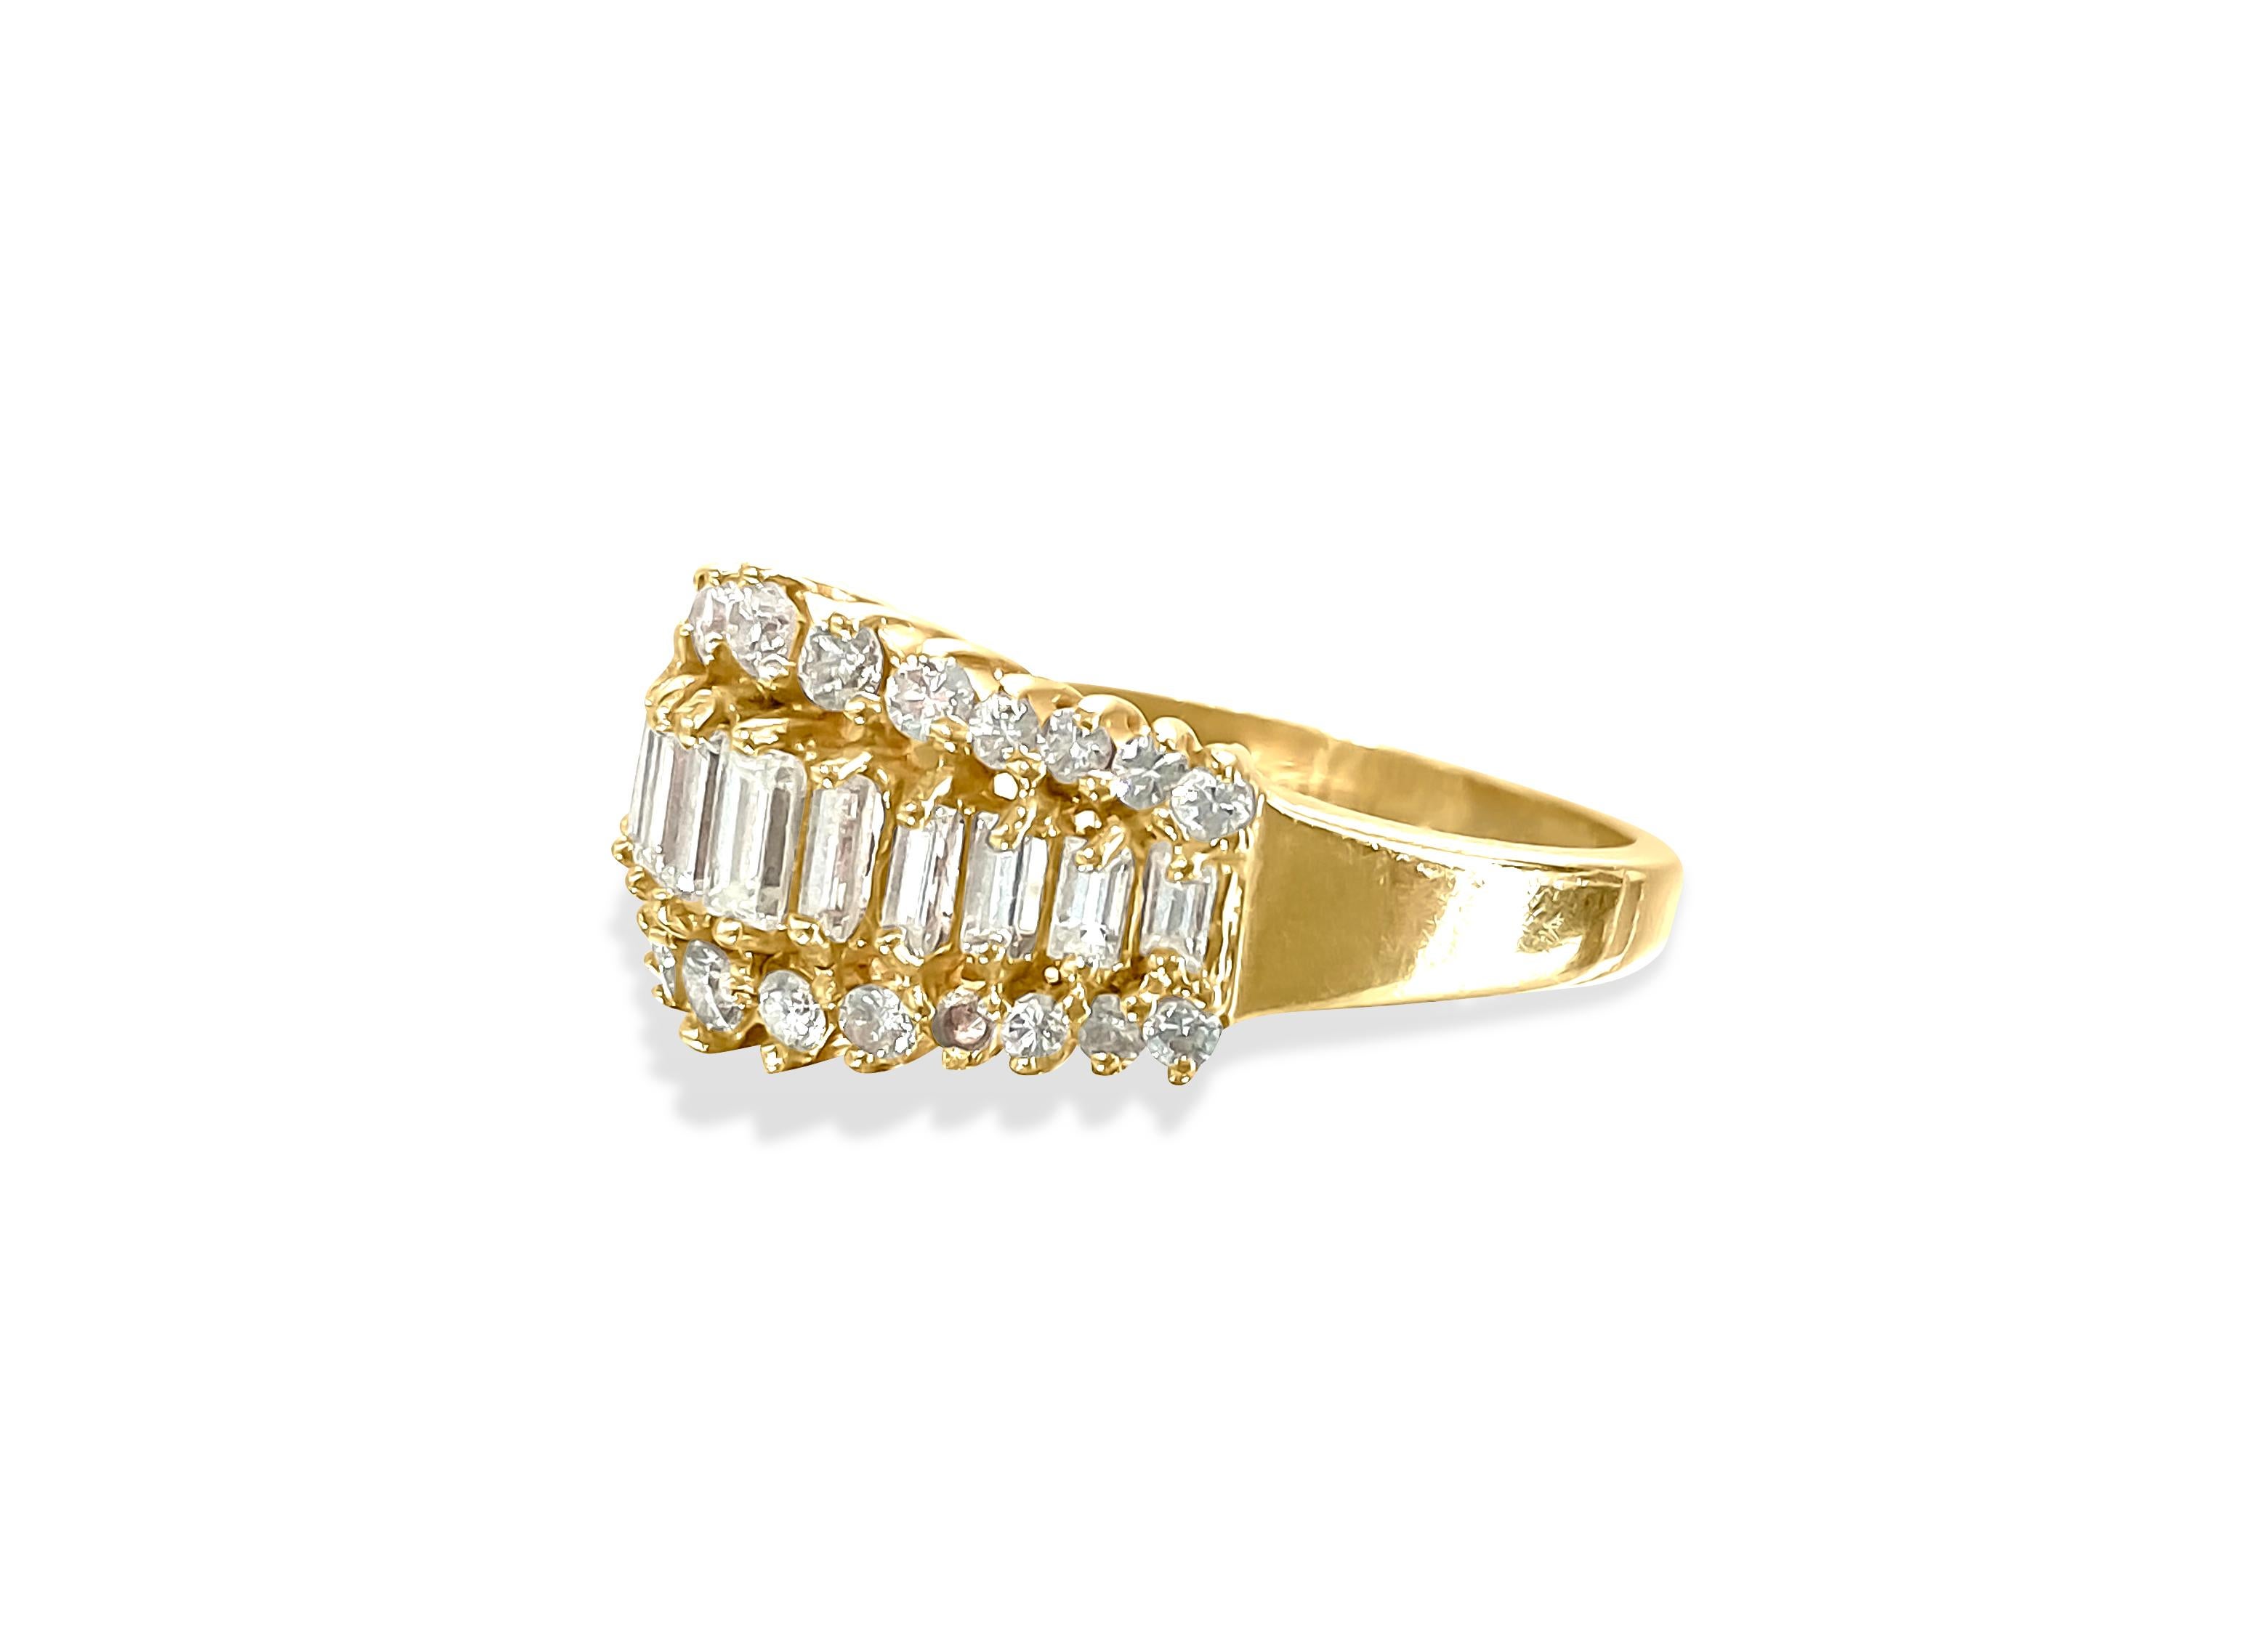 Behold this stunning 14K yellow gold ring adorned with a total of 1.00 carats of dazzling diamonds, featuring both round brilliant and baguette cuts, set meticulously in prongs. It boasts VS clarity and F-G color, exuding elegance and